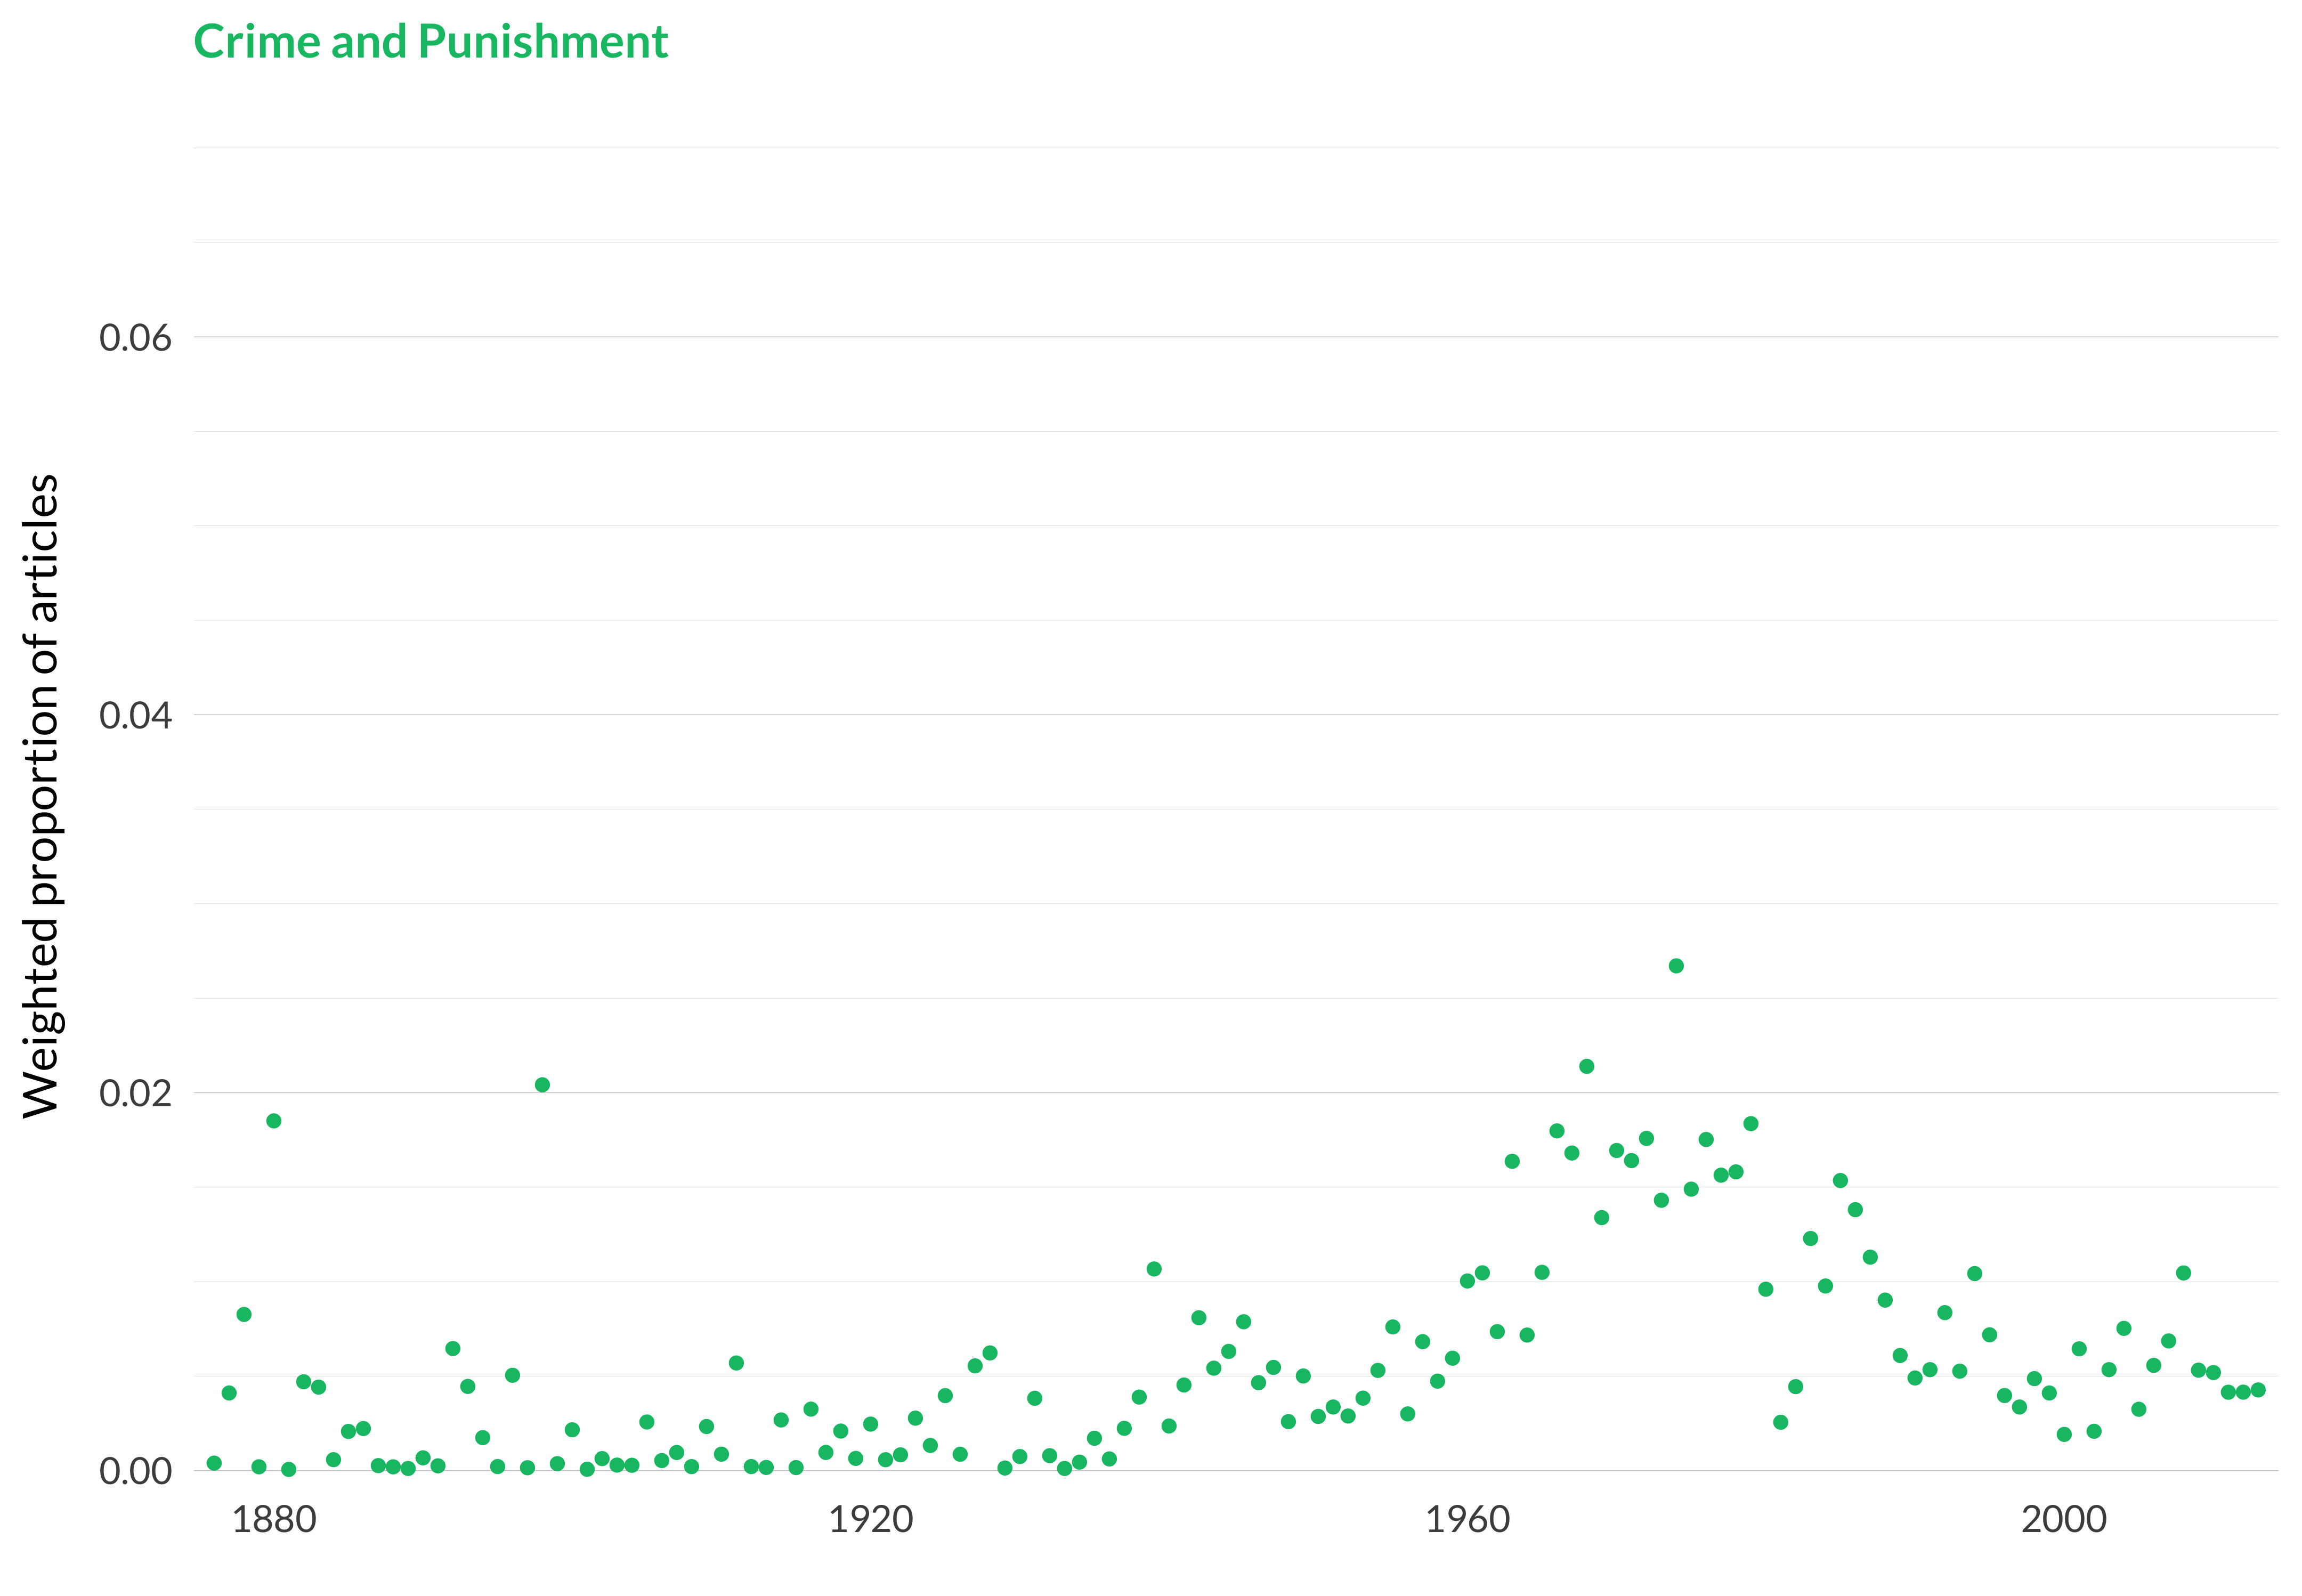 A scatterplot showing which proportion of articles each year are in the crime and punishmenttopic. The x-axis shows the year, the y-axis measures the proportion of articles each year in this topic. There is one dot per year. The highest value is in 1974 when 2.7% of articles were in this topic. The lowest value is in 1881 when 0.0% of articles were in this topic. The full table that provides the data for this graph is available in Table A.36 in Appendix A.